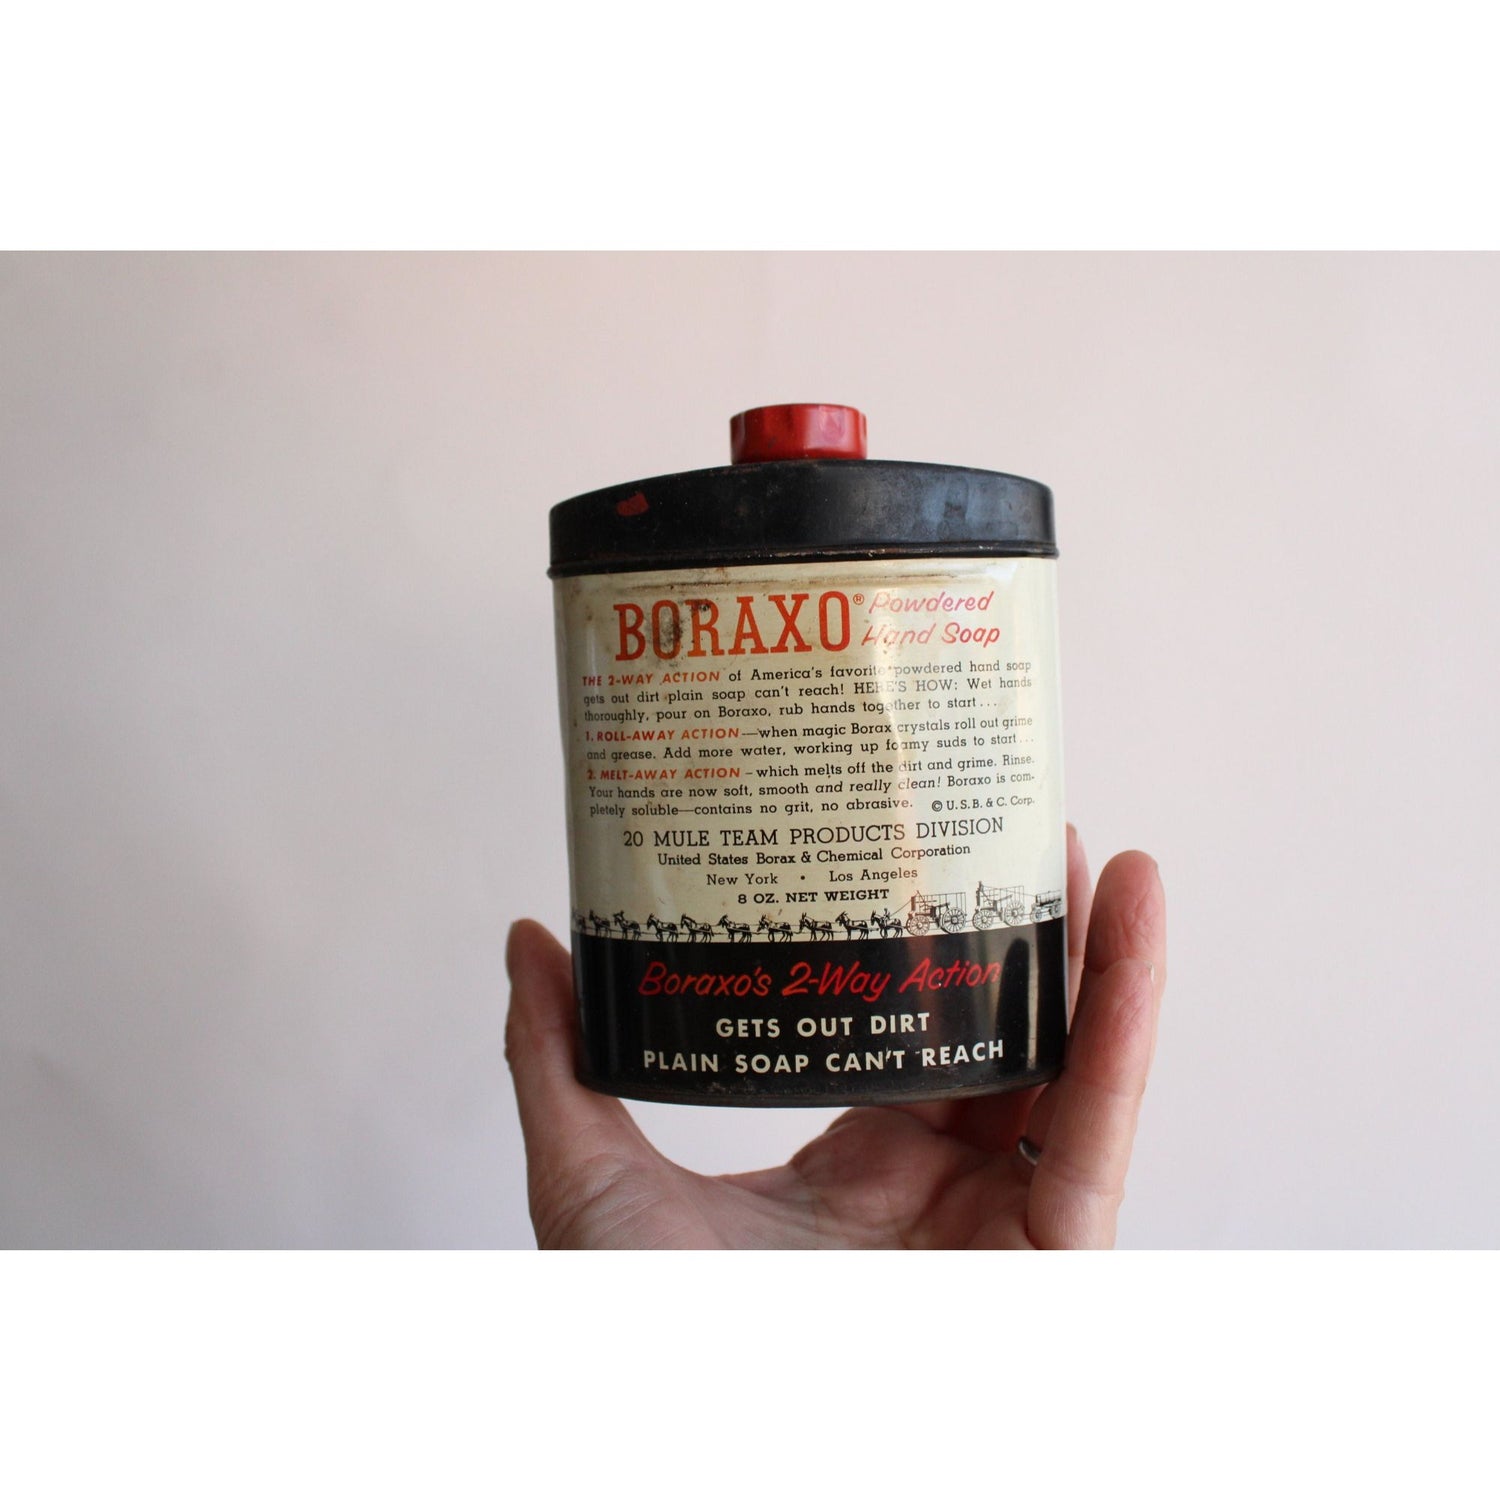 Product Review: Boraxo Powdered Hand Soap